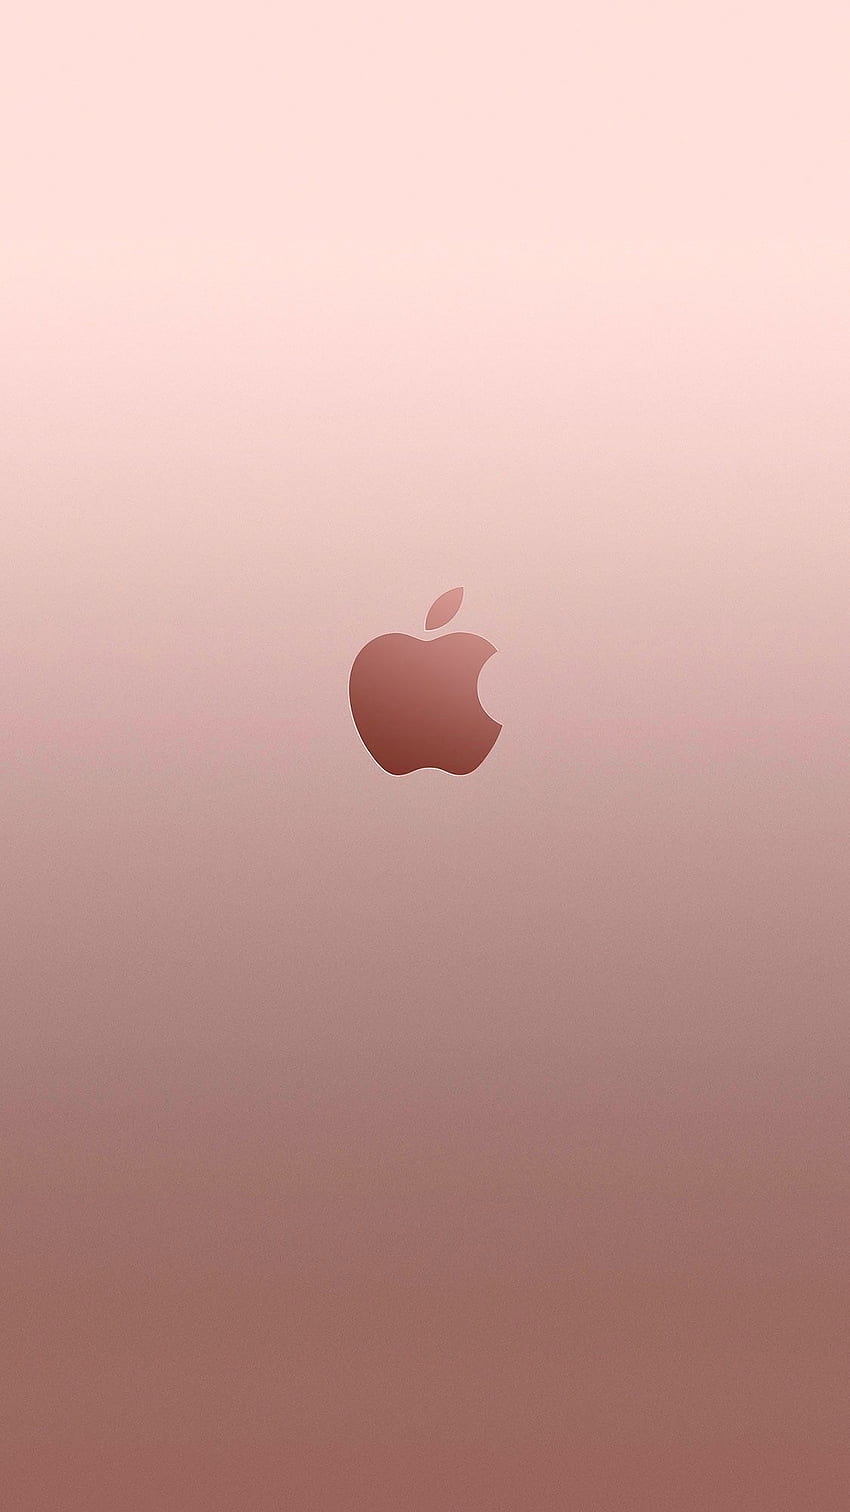 Apple rose gold iphone . iphone in 2019. apple. Gold iphone, iPhone 7 plus , Rose gold iphone, Cute Apple iPhone 7 HD phone wallpaper